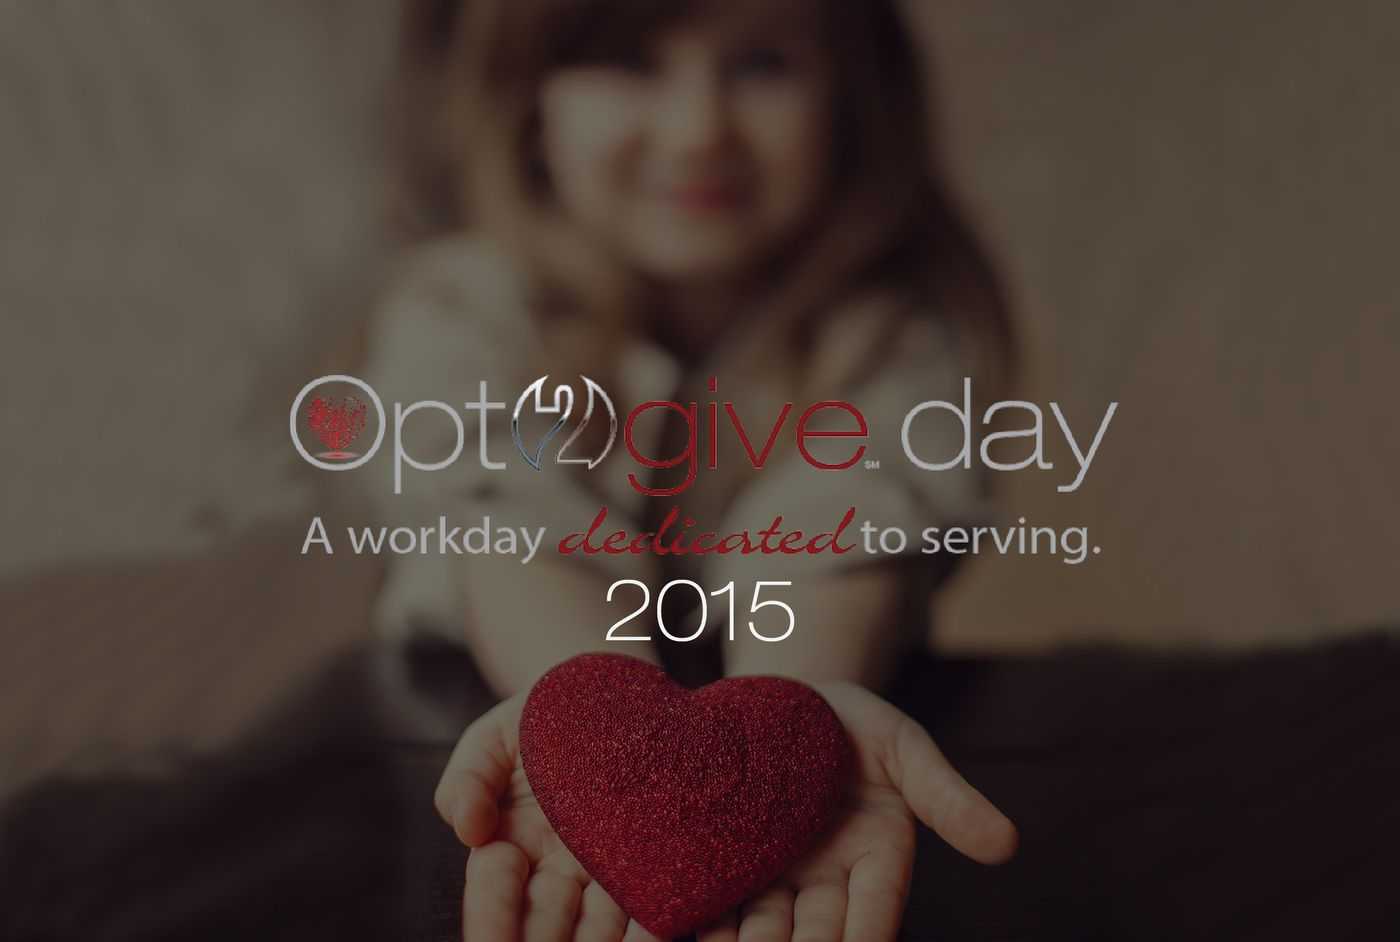 Opt2give day 2015 makes a HUGE impact